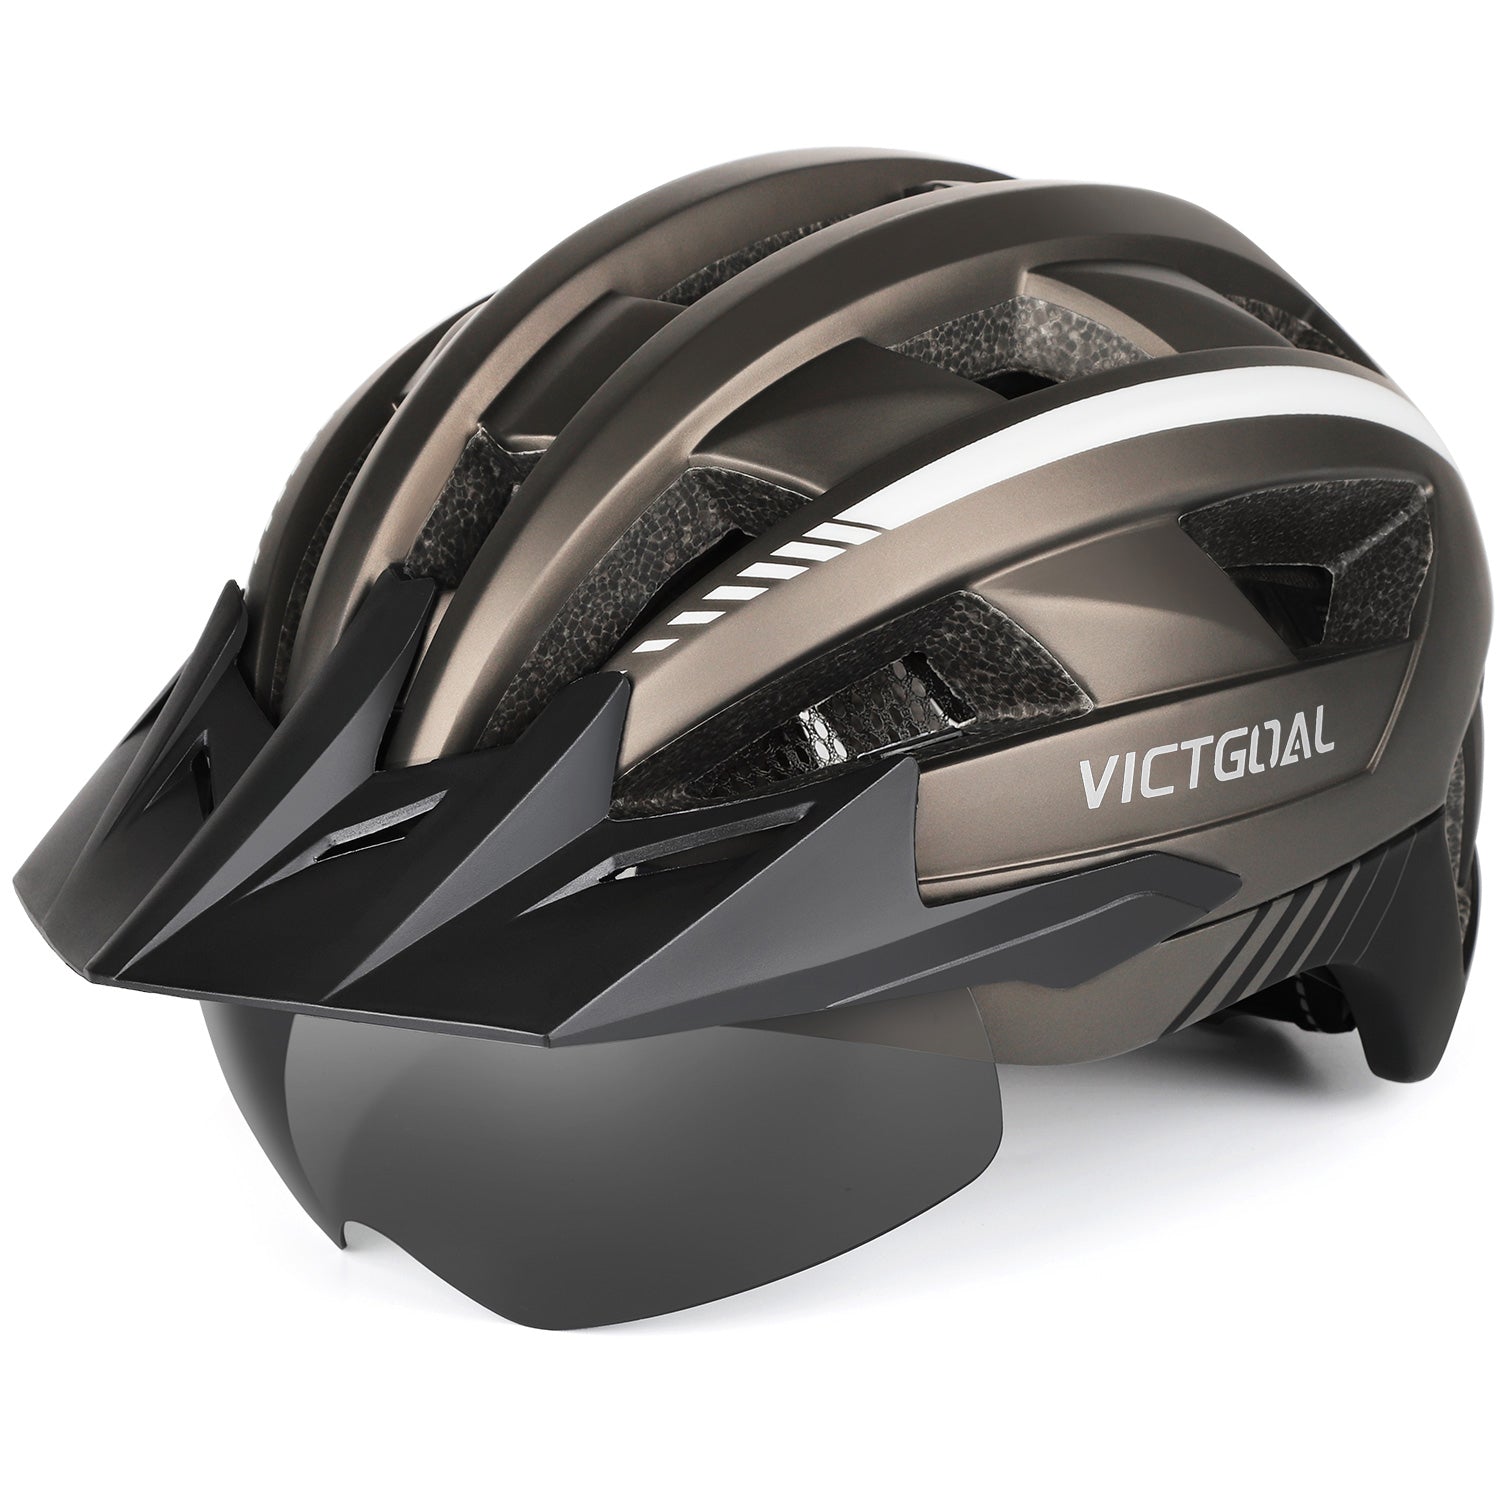 VICTGOAL Bike Helmet for Men Women with Led Light Detachable Magnetic Goggles Removable Sun Visor Mountain & Road Bicycle Helmets Adjustable Size Adult Cycling Helmets VICTGOAL